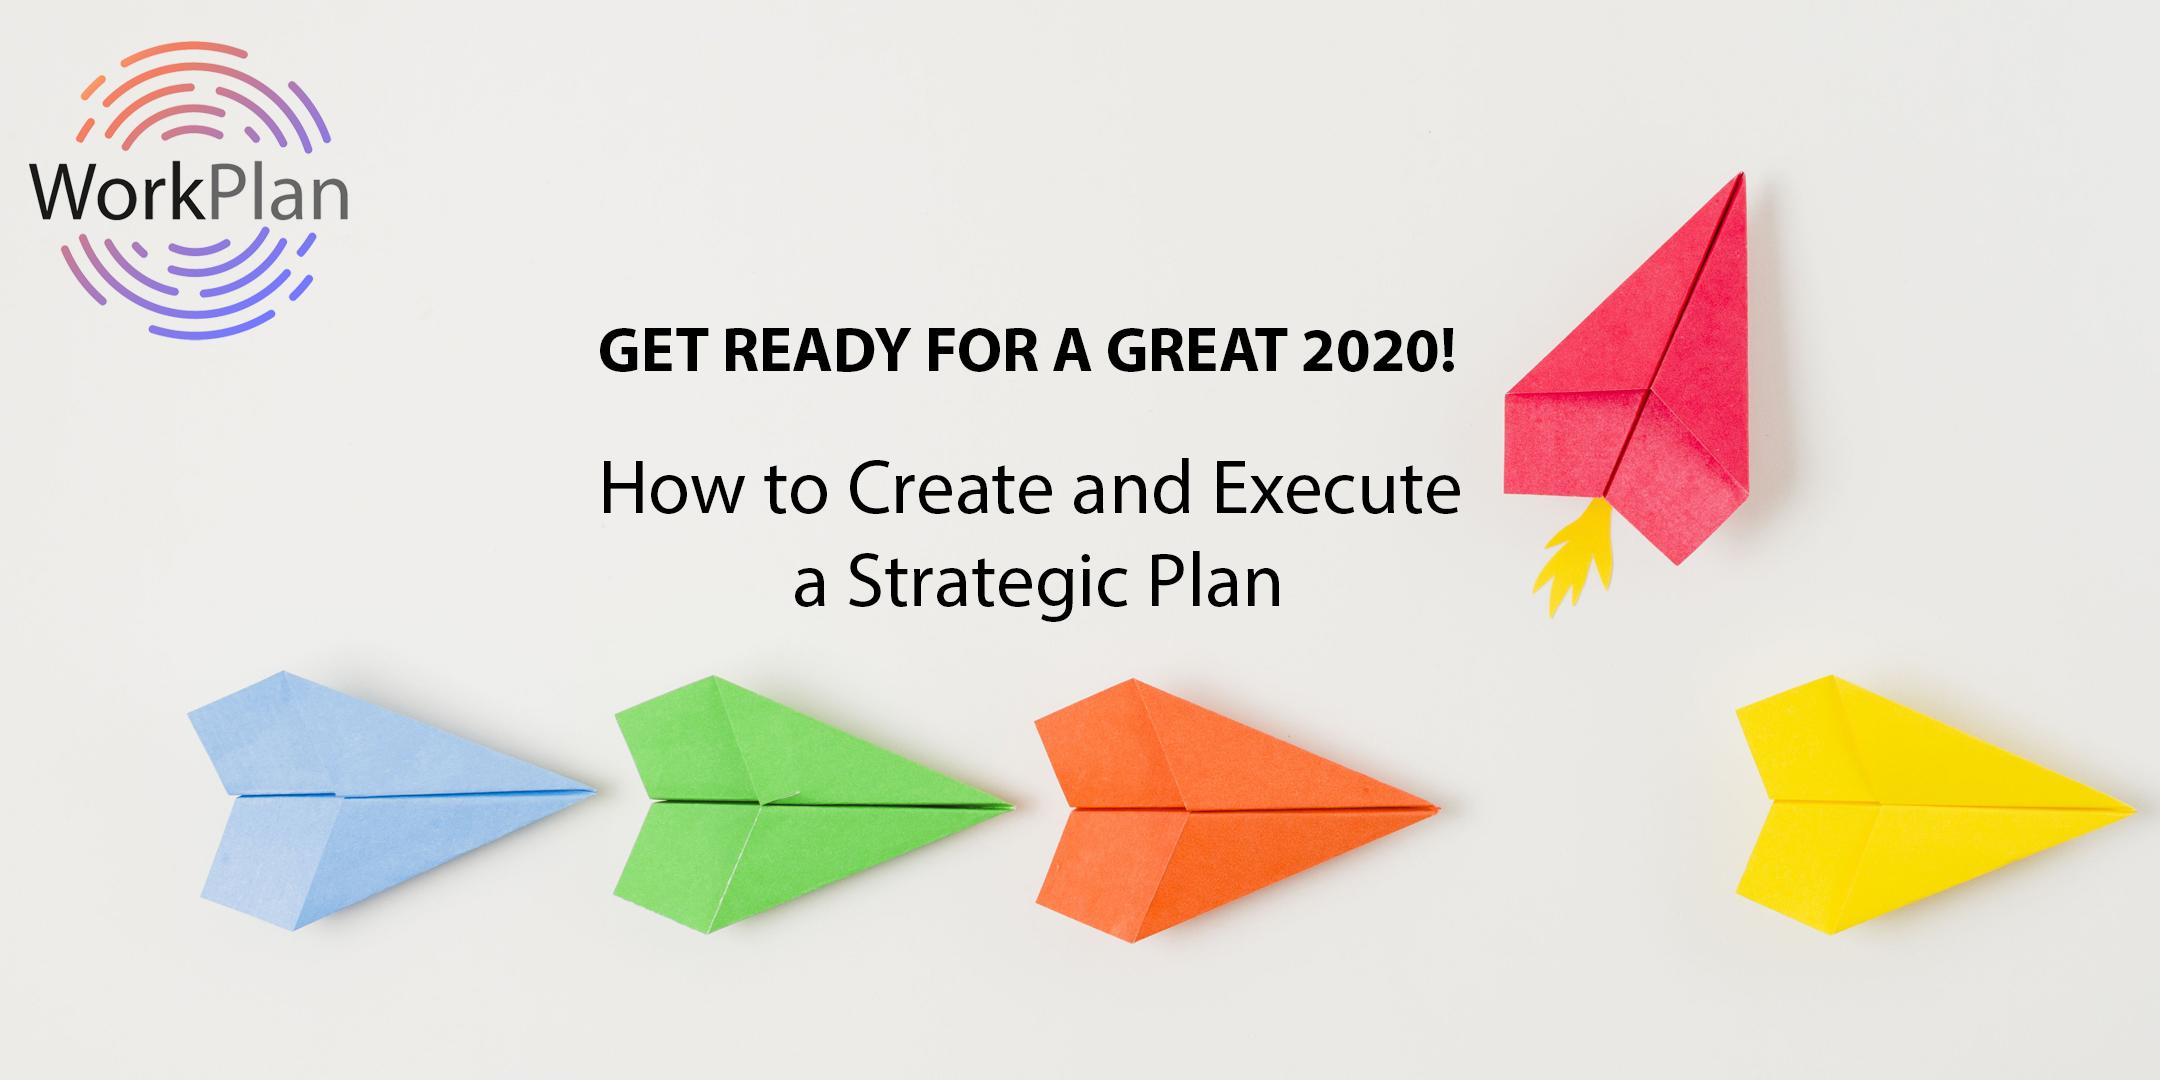 How to Create and Execute a Strategic Plan